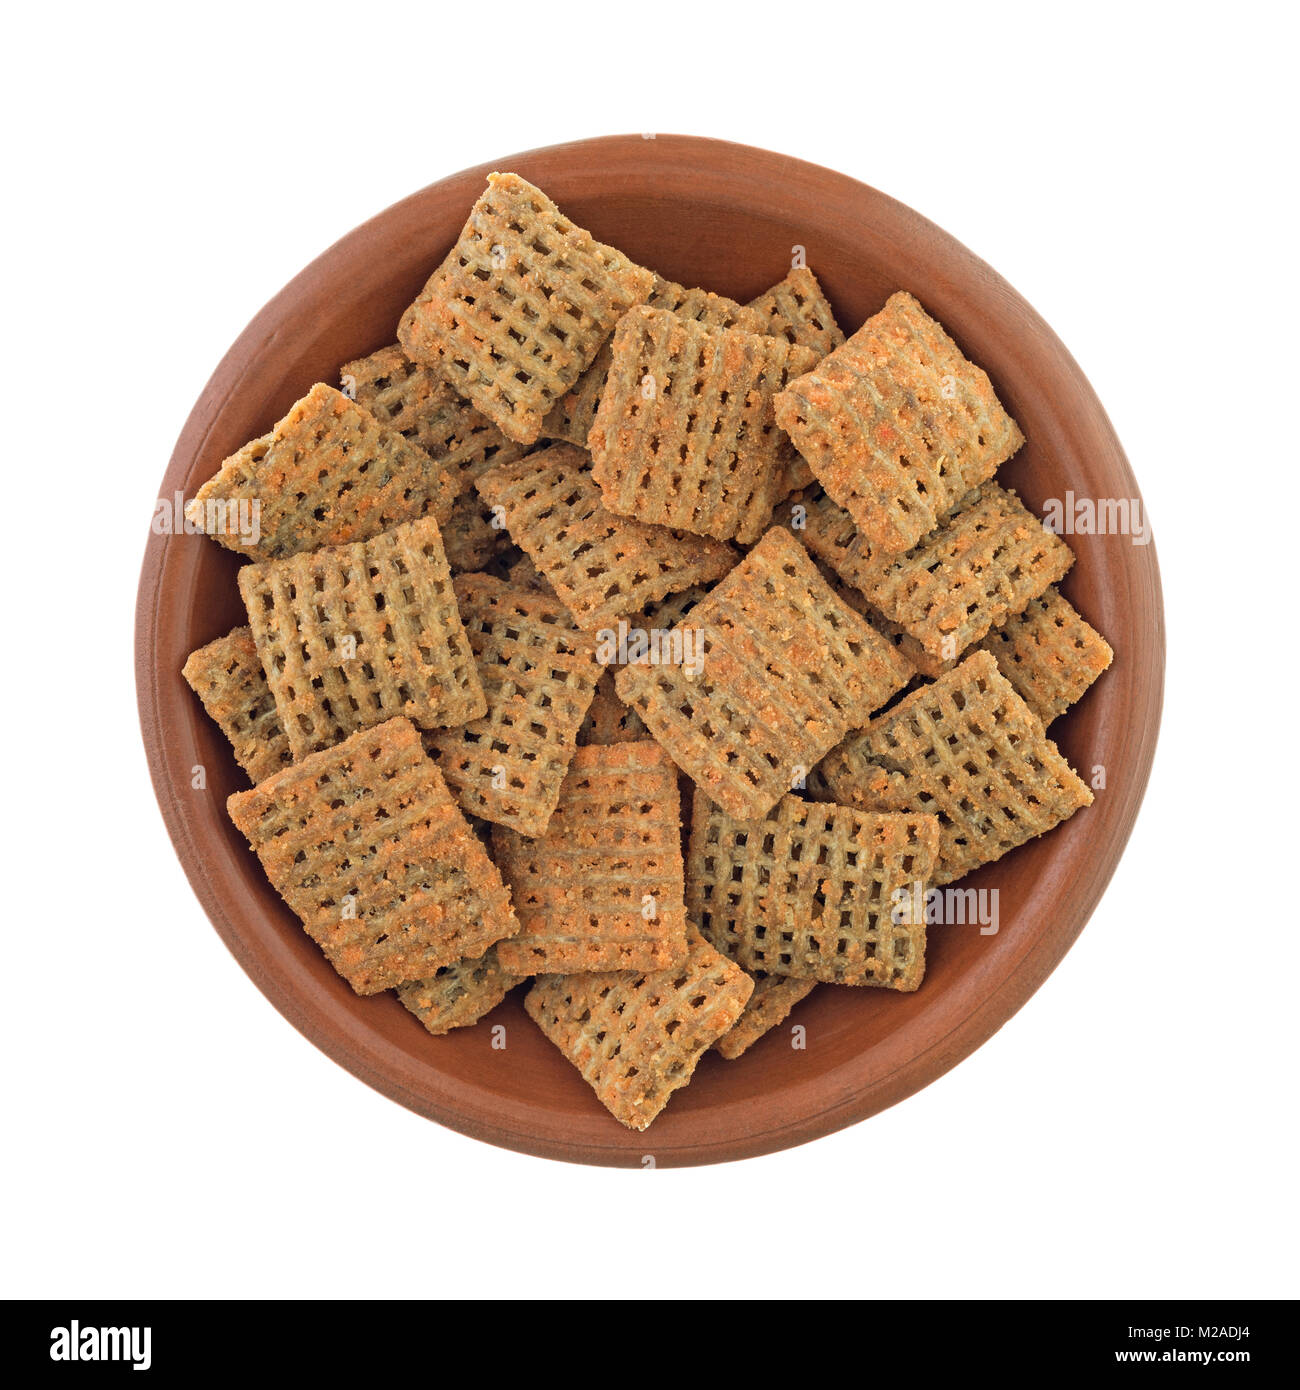 Top view of a small bowl filled with cheddar cheese flavored square wheat crisps isolated on a white background. Stock Photo